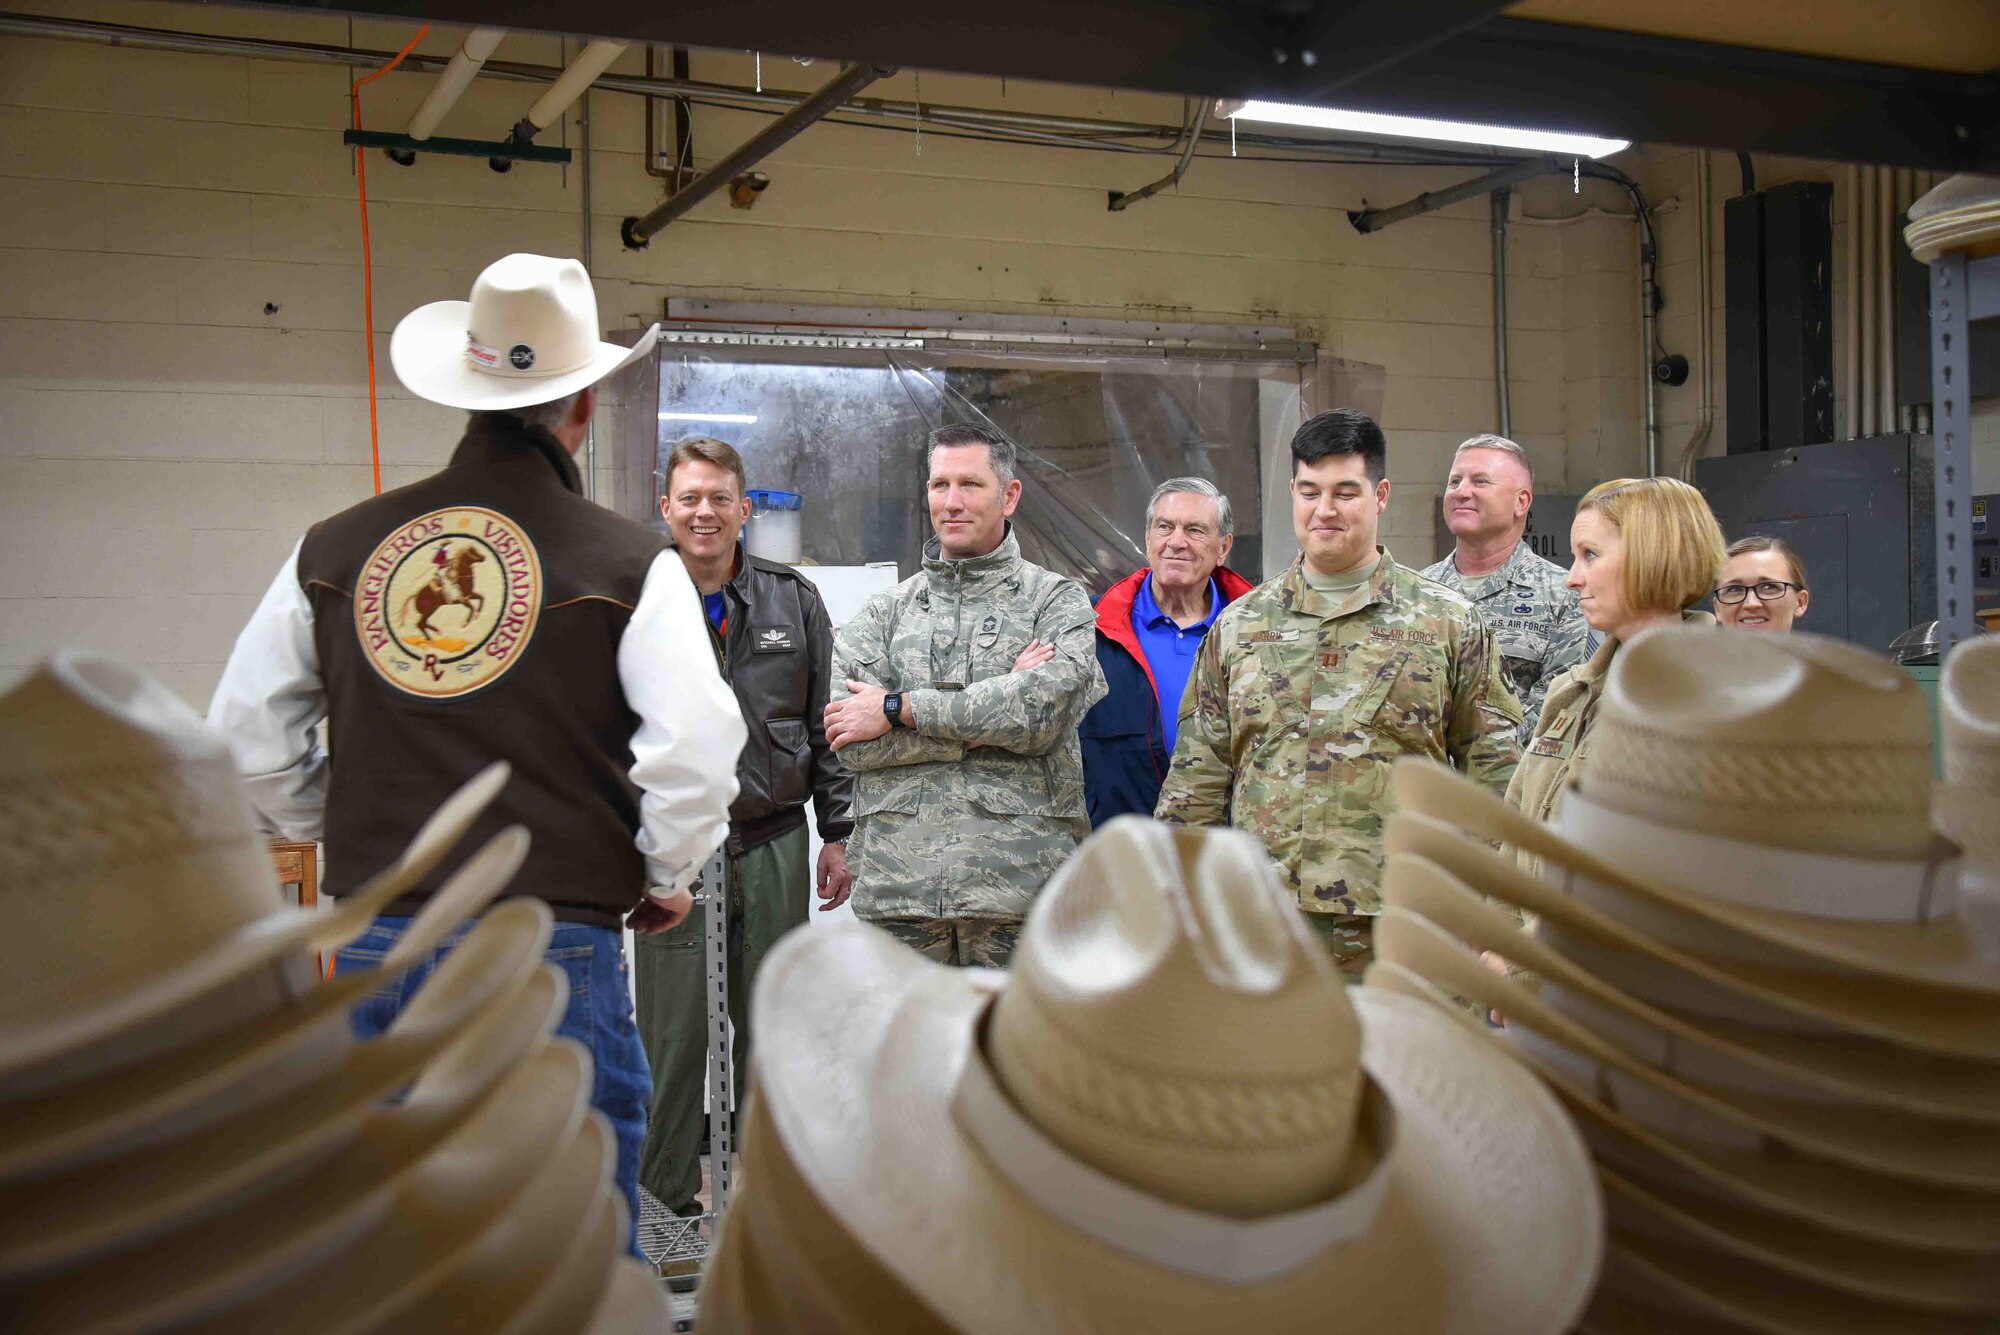 On November 15, 2019, several members of wing leadership tour American Hat Company in Bowie, Texas. They were greeted by 301 FW Aircraft Maintenance Squadron Honorary Commander Mr. Keith Mundee who is also the president of American Hat Co. The 301st Fighter Wing Honorary Commanders program aims to partner with local civic leaders on several fronts. The invitation not only allows these commanders to be adopted by one of the wing’s units but more importantly, it allows them the opportunity to get to know the Airmen who make the mission happen. (U.S. Air Force photo by Mr. Jeremy Roman)